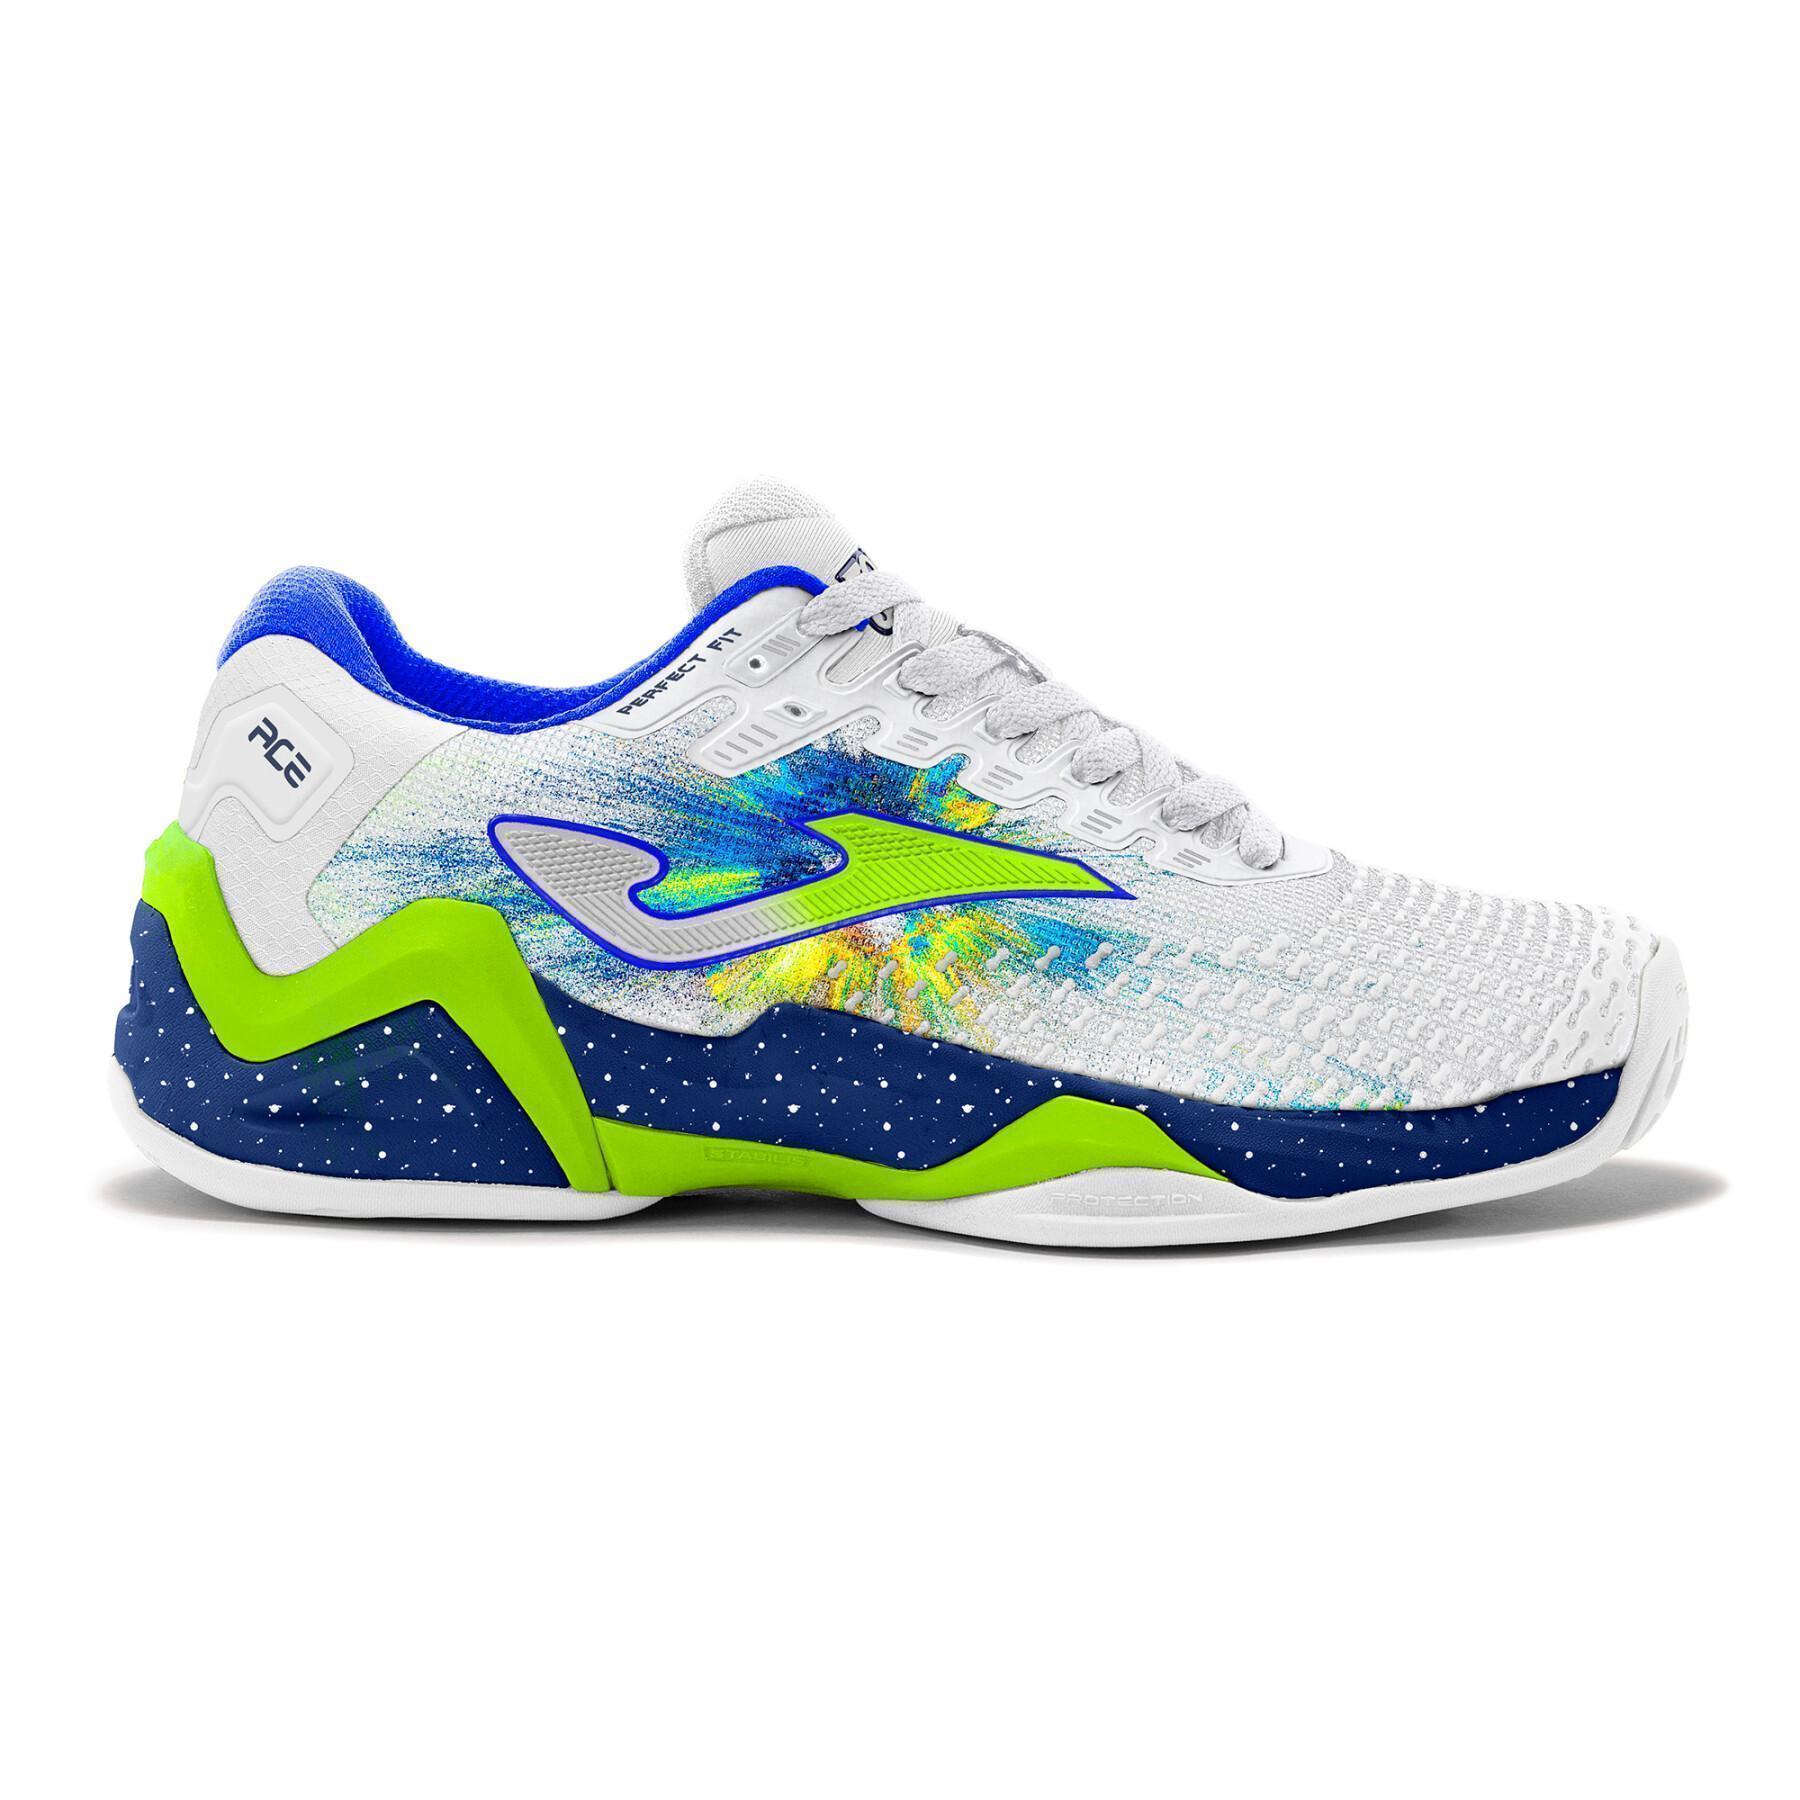 Tennis shoes Joma Ace 2332